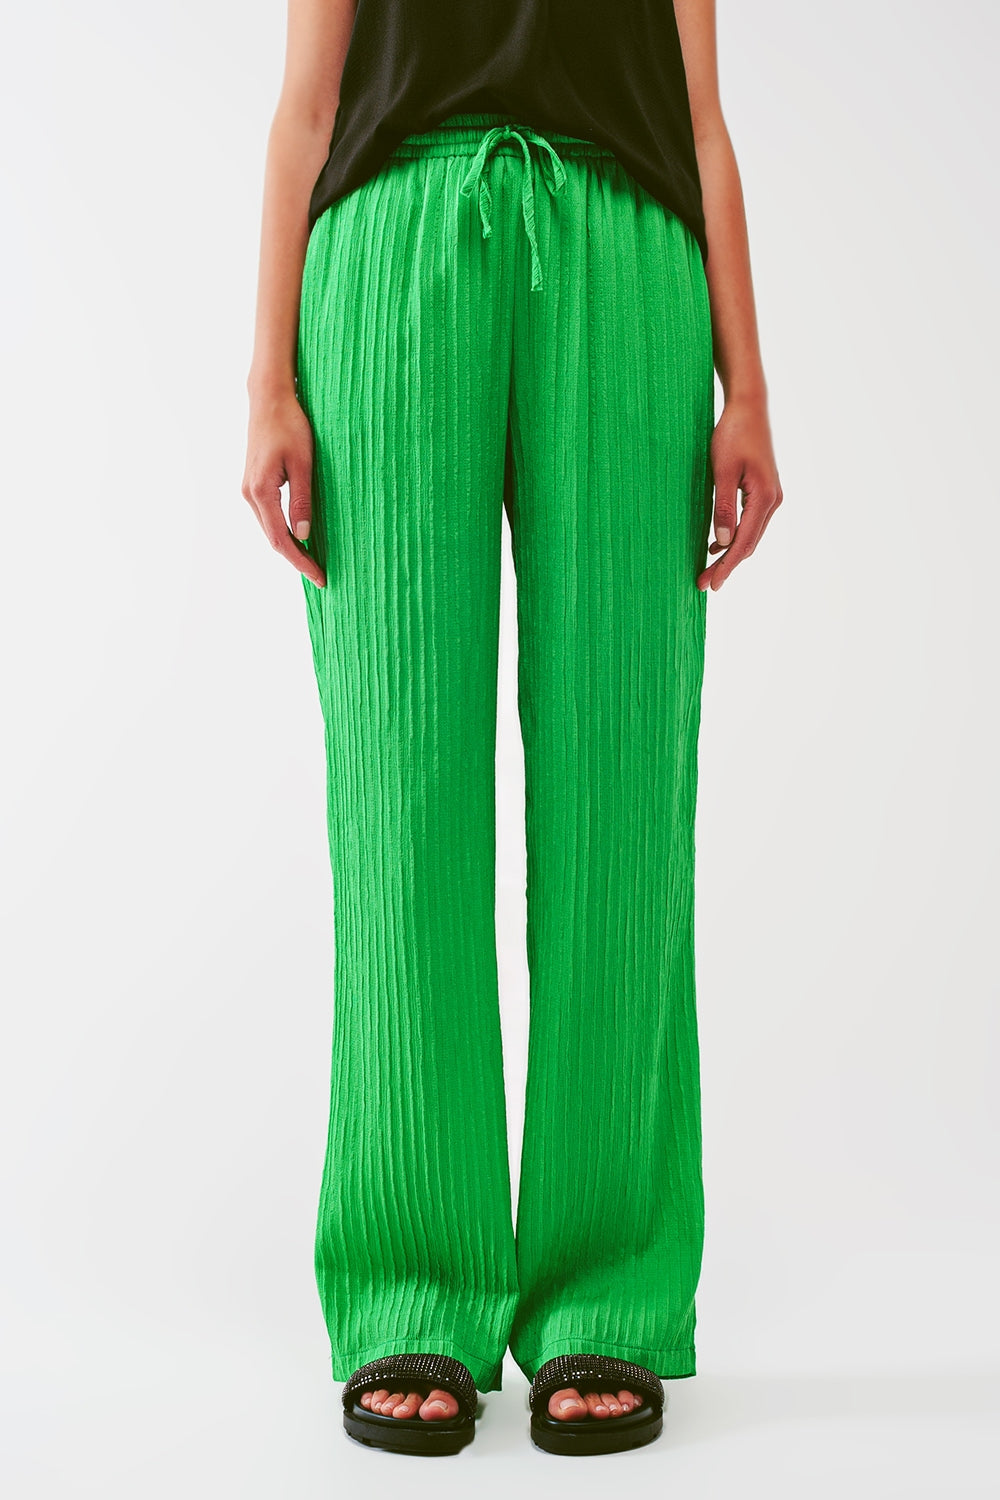 Q2 Loose Fit Striped Pants in Green